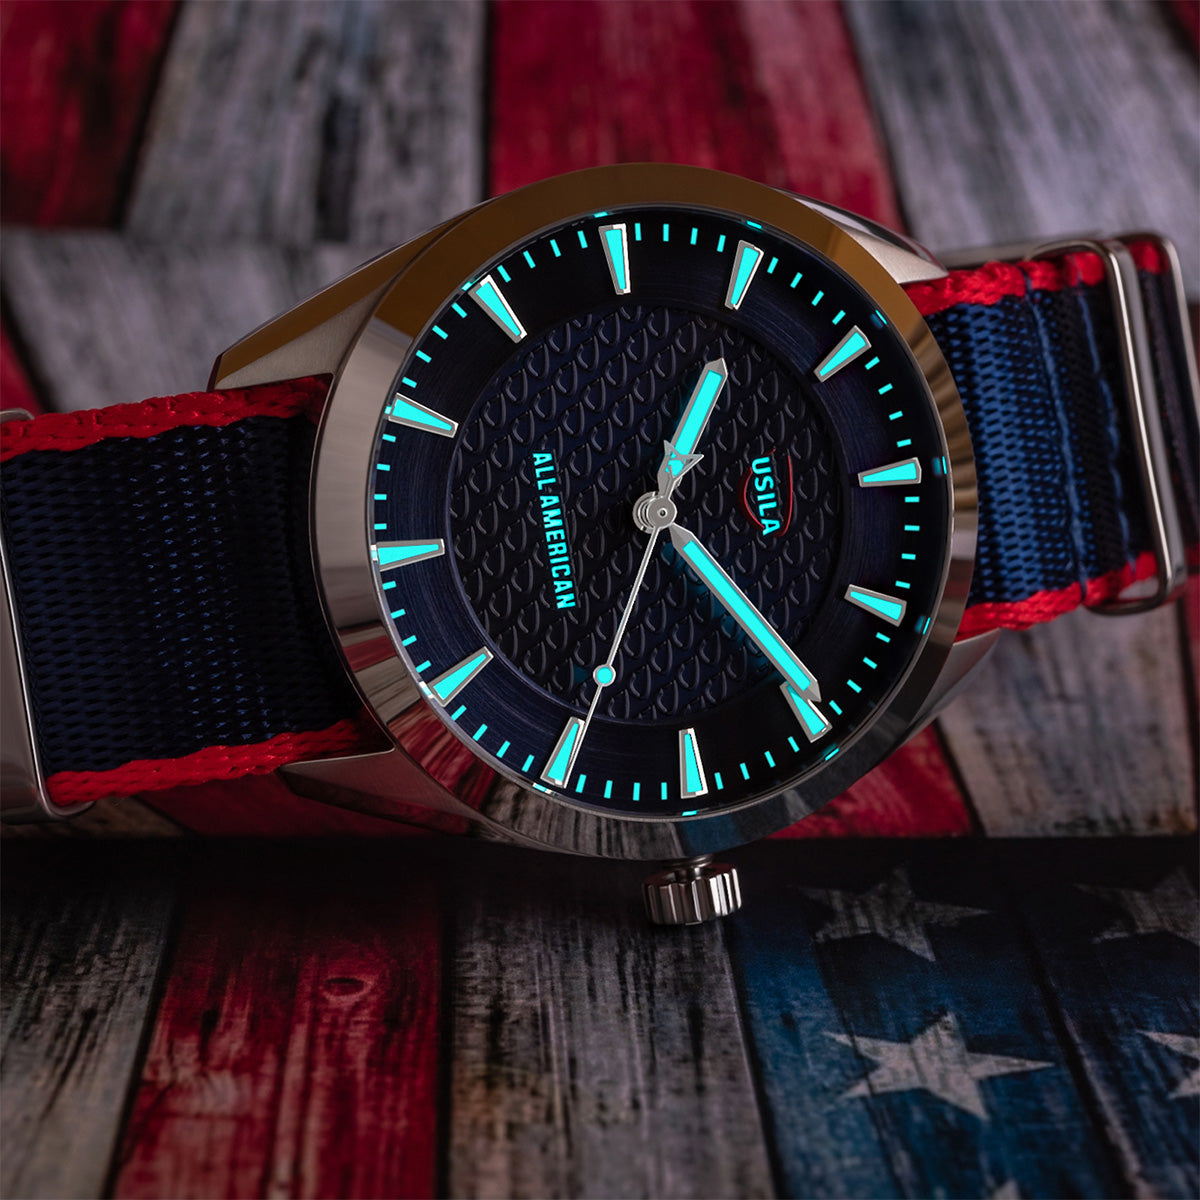 USILA All American Kairos II Swiss made automatic watch. Table view NATO strap. Lume view.